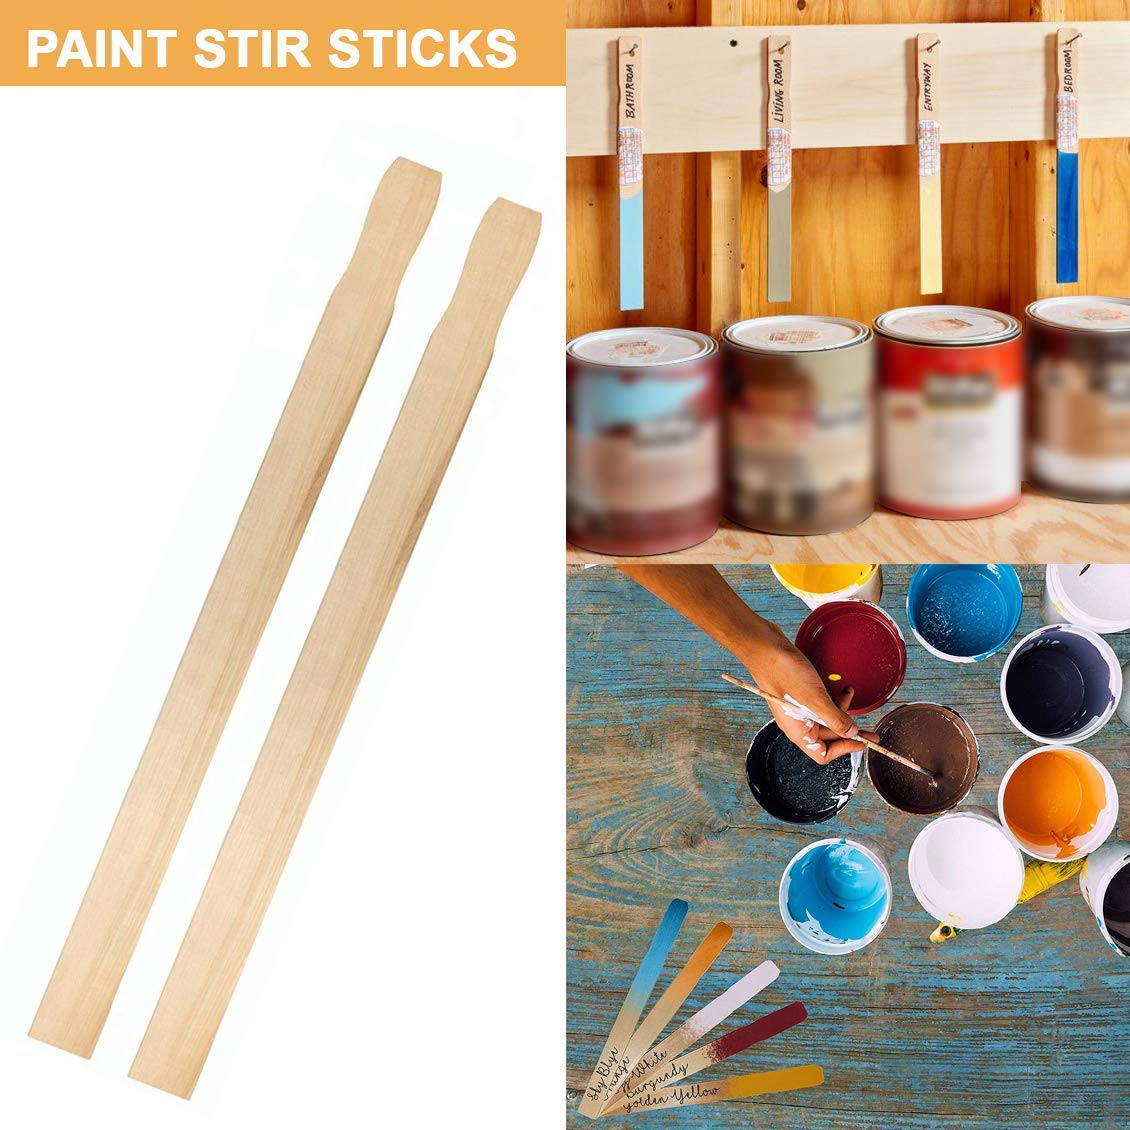 Wooden Paint Stir Sticks - Rewiss 10 Inch Paint Sticks Stirrers for Paddles Resin or Wood Craft Sticks, Garden and Library Markers(Pack of 50)